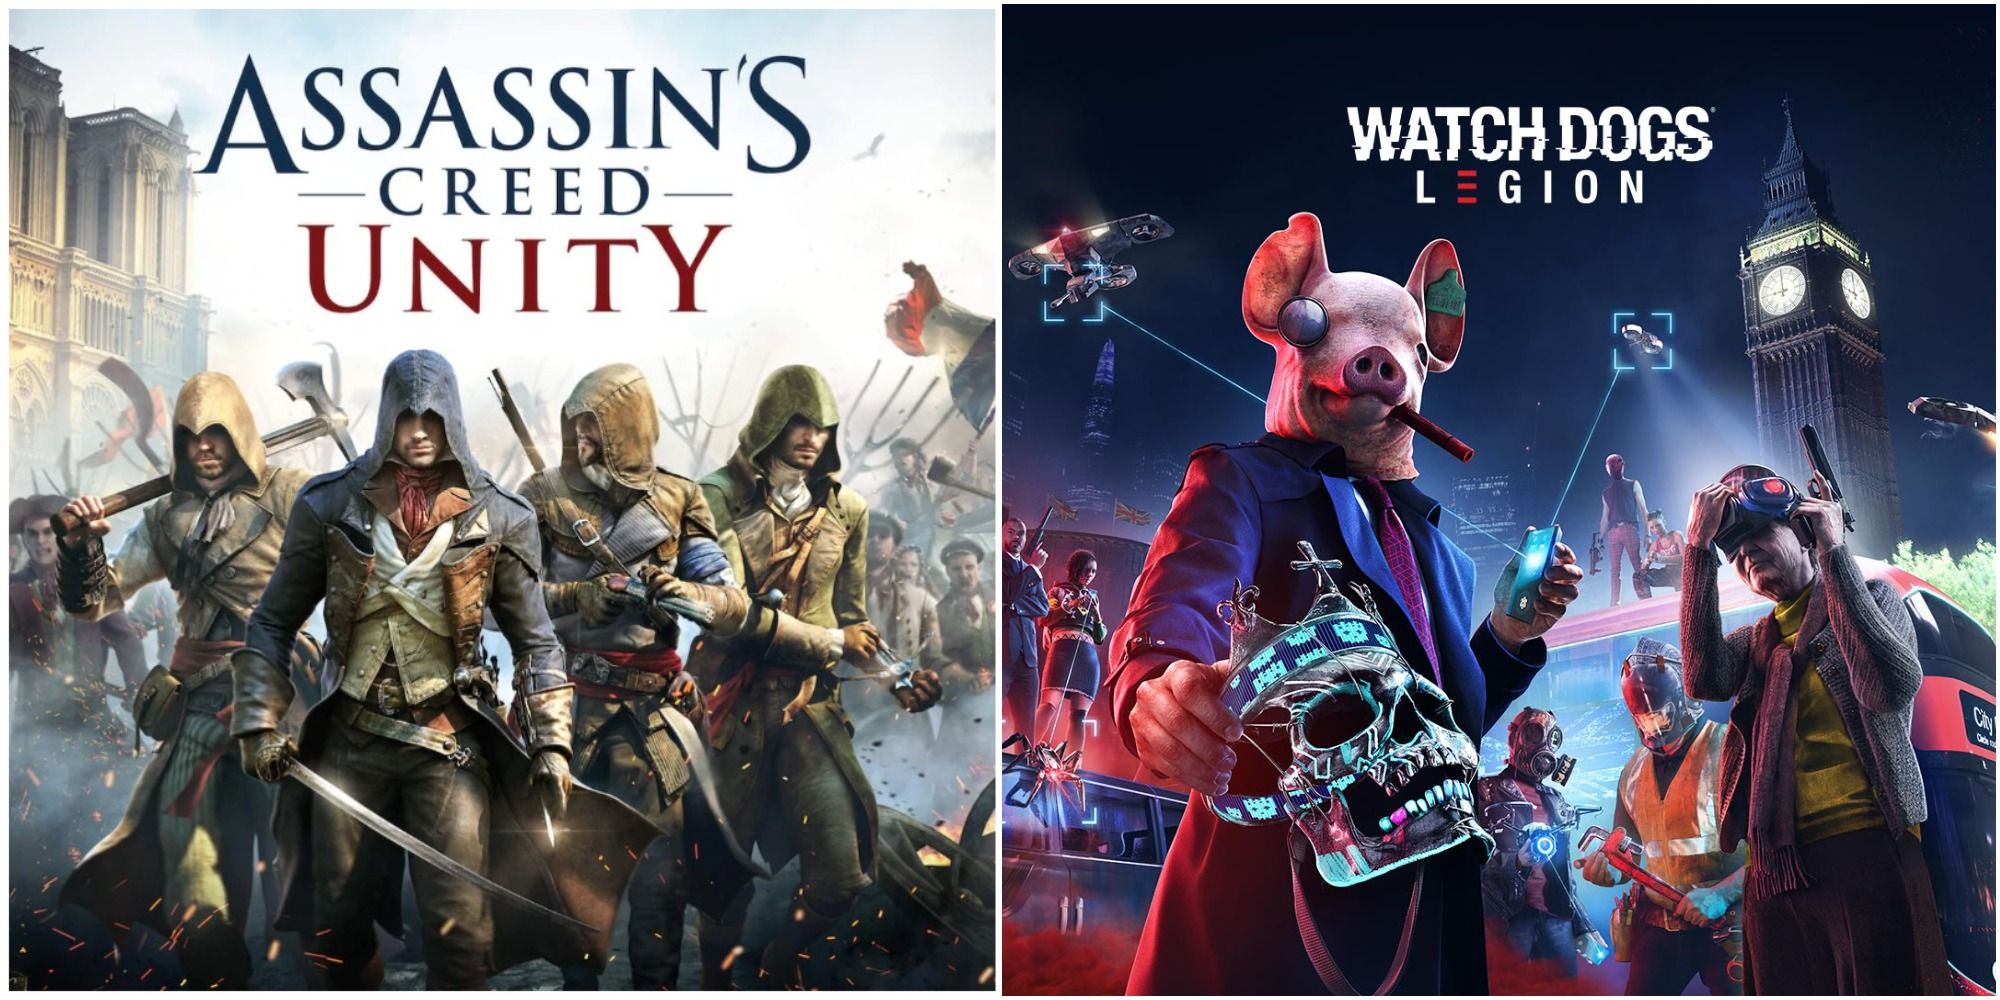 assassin's creed and watch dogs legion